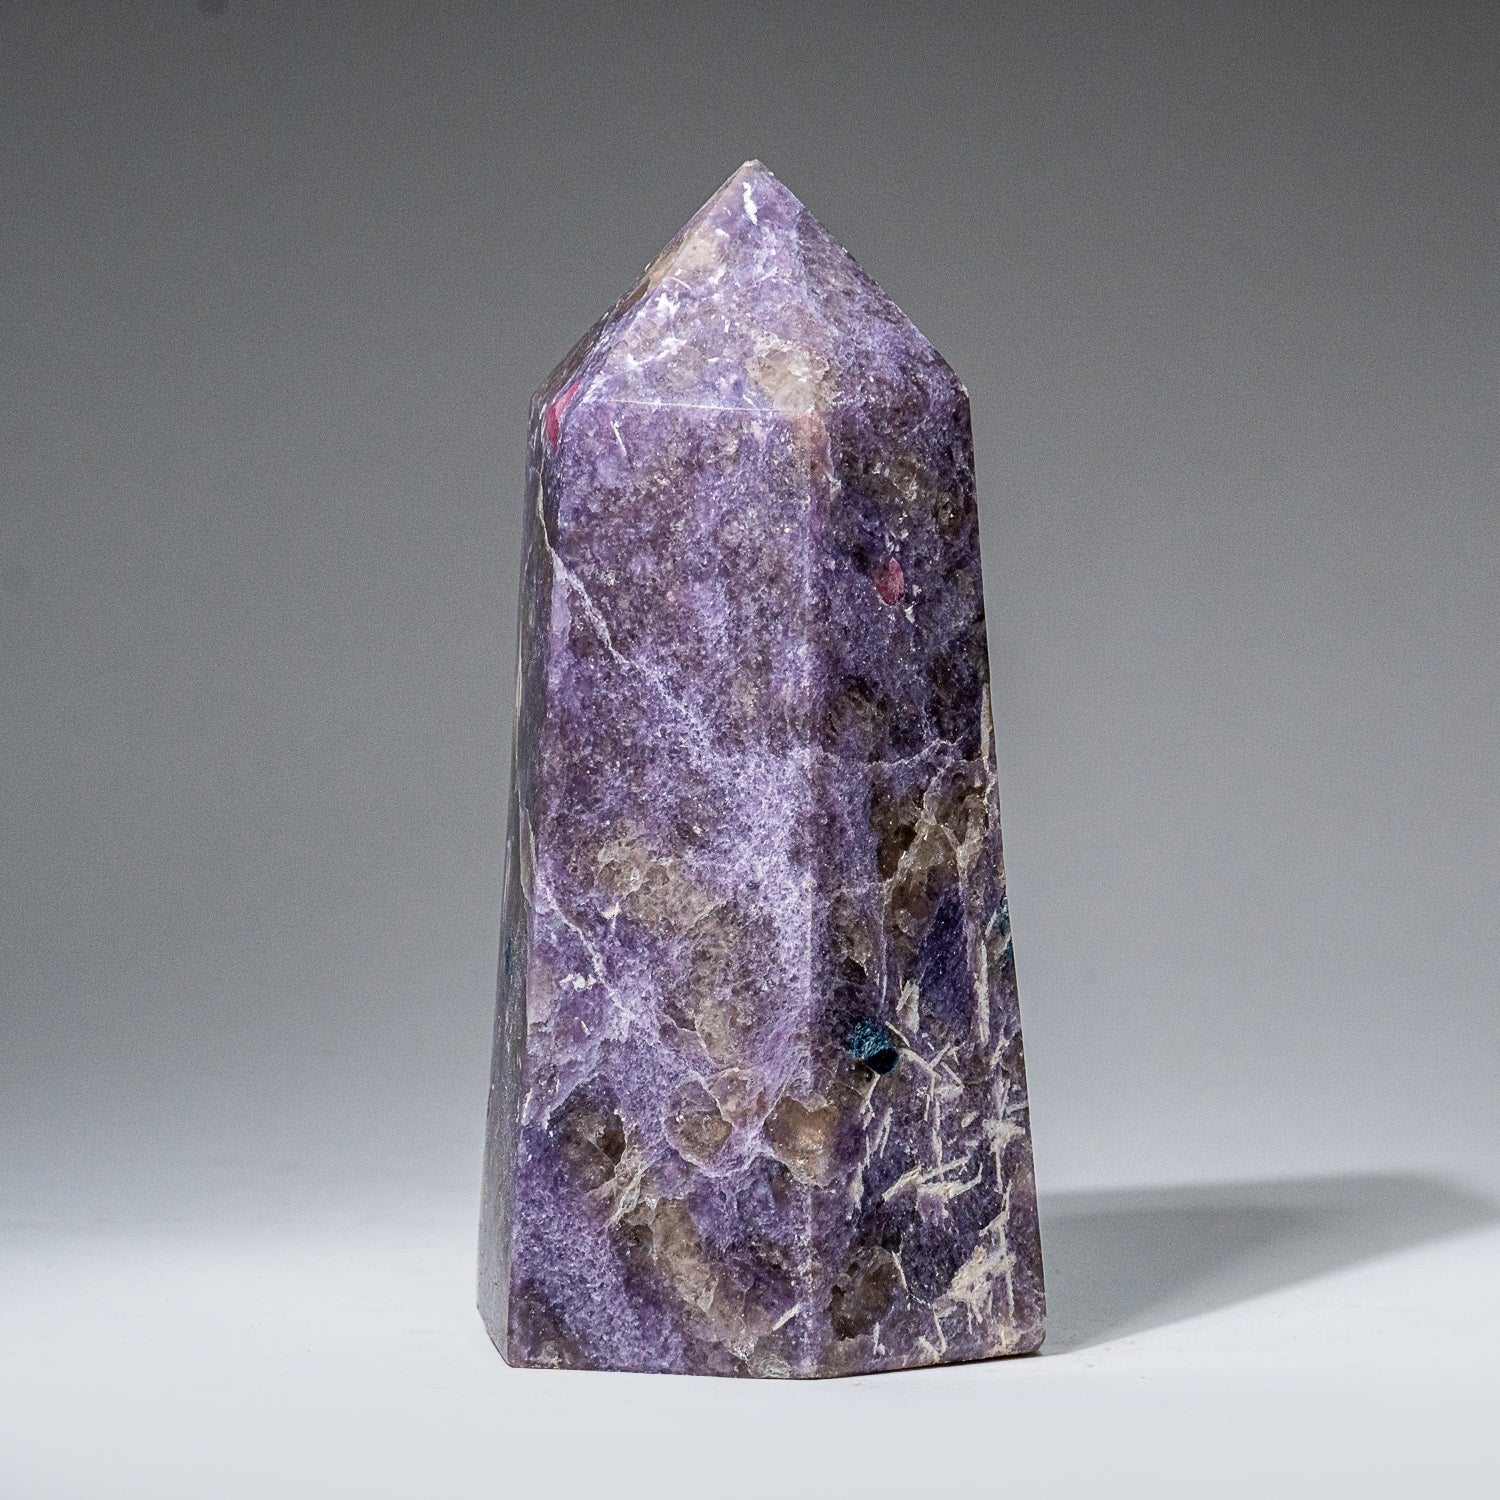 Genuine Polished Lepidolite Point from Madagascar (1.9 lbs)